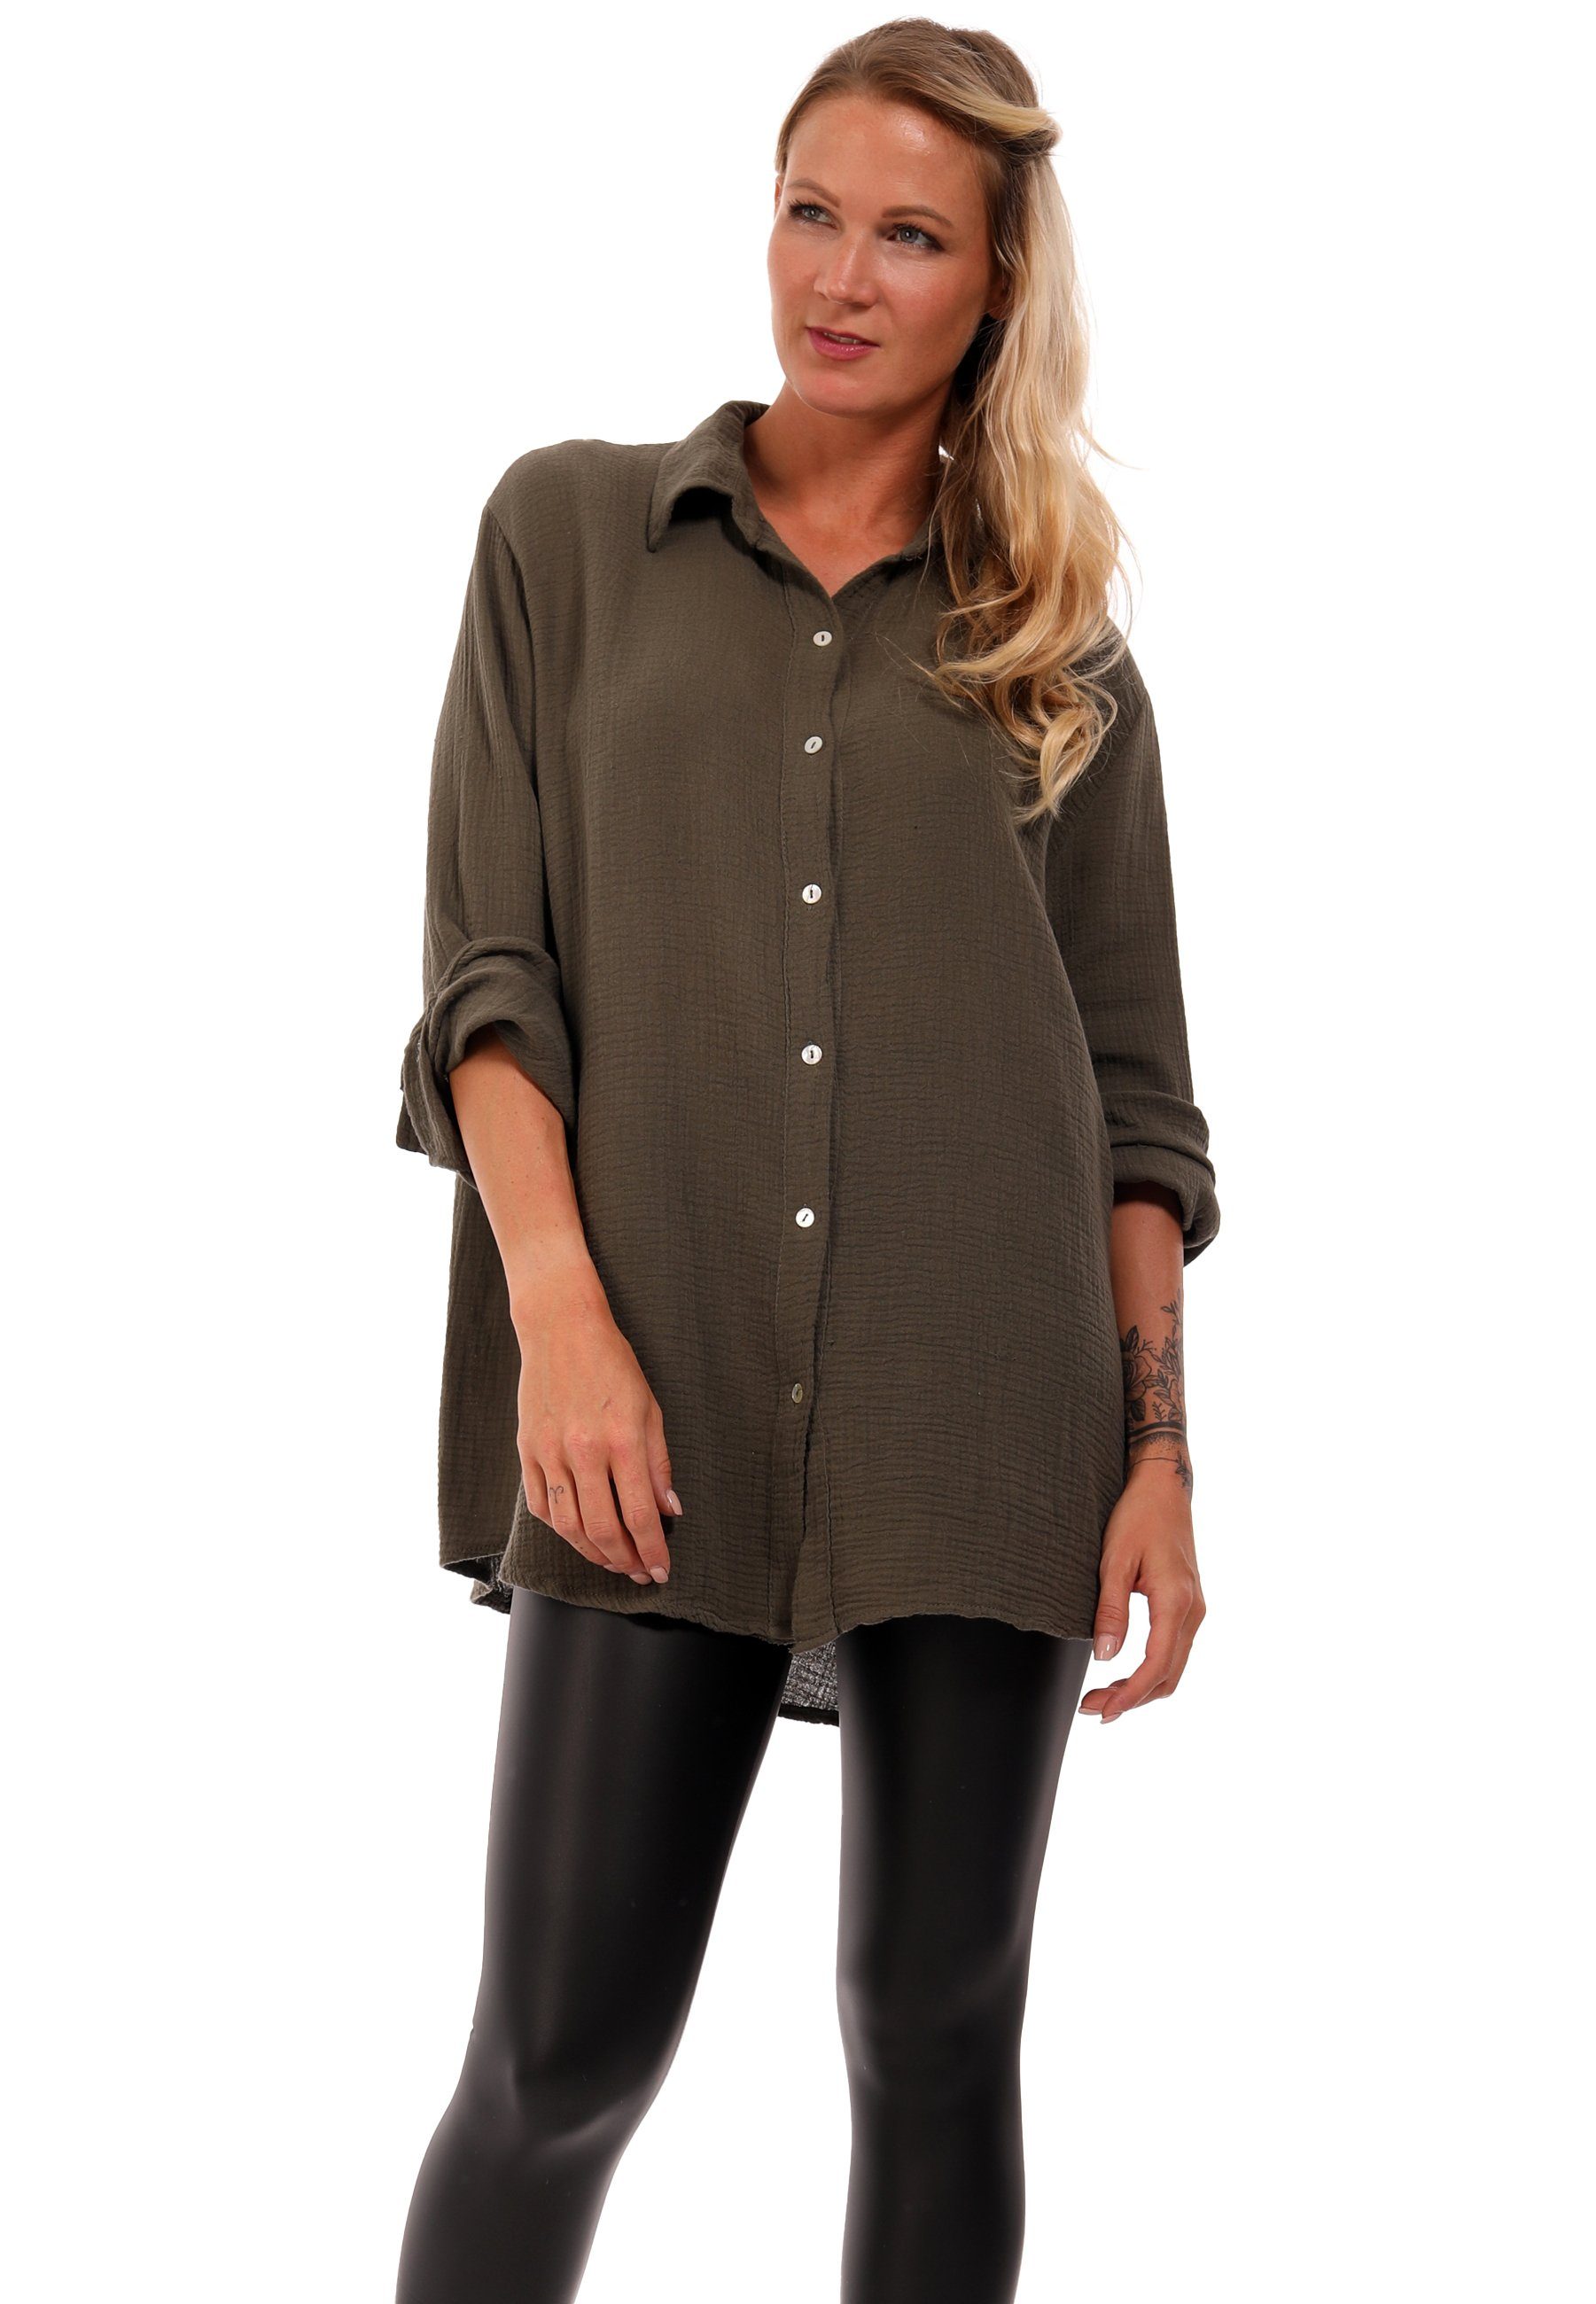 YC Fashion & Style Hemdbluse »Bluse Langarm Casual Longbluse Loose-Fit in  vielen Farben One Size« Uni, Casual, Langarm, Hinten länger